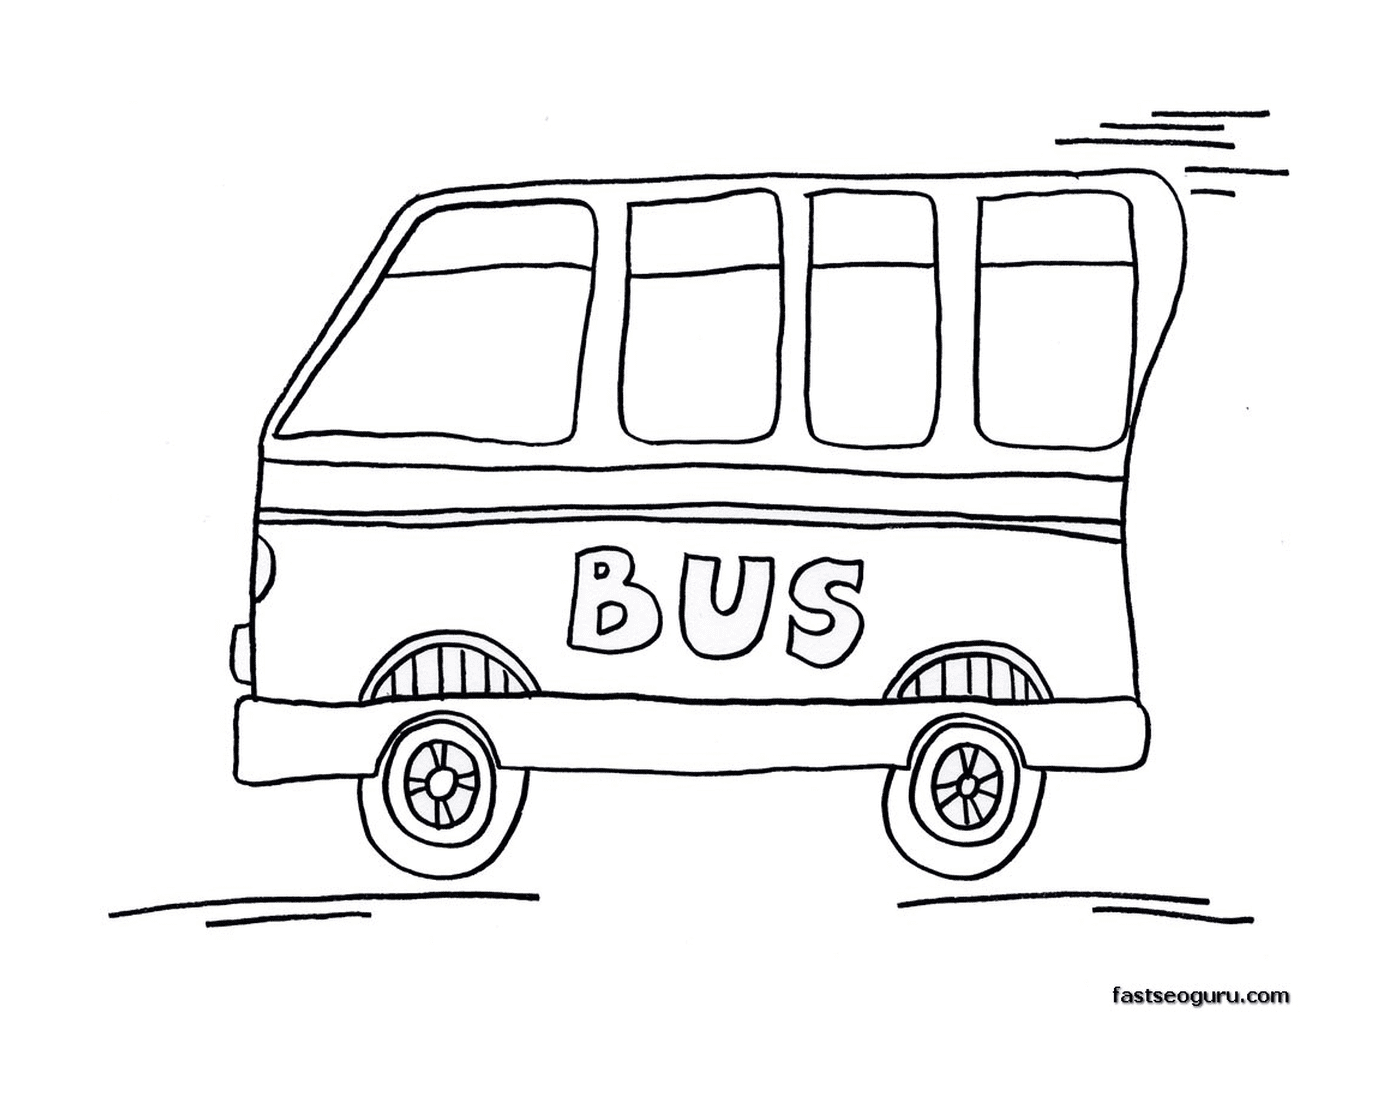  There's a bus on the road 